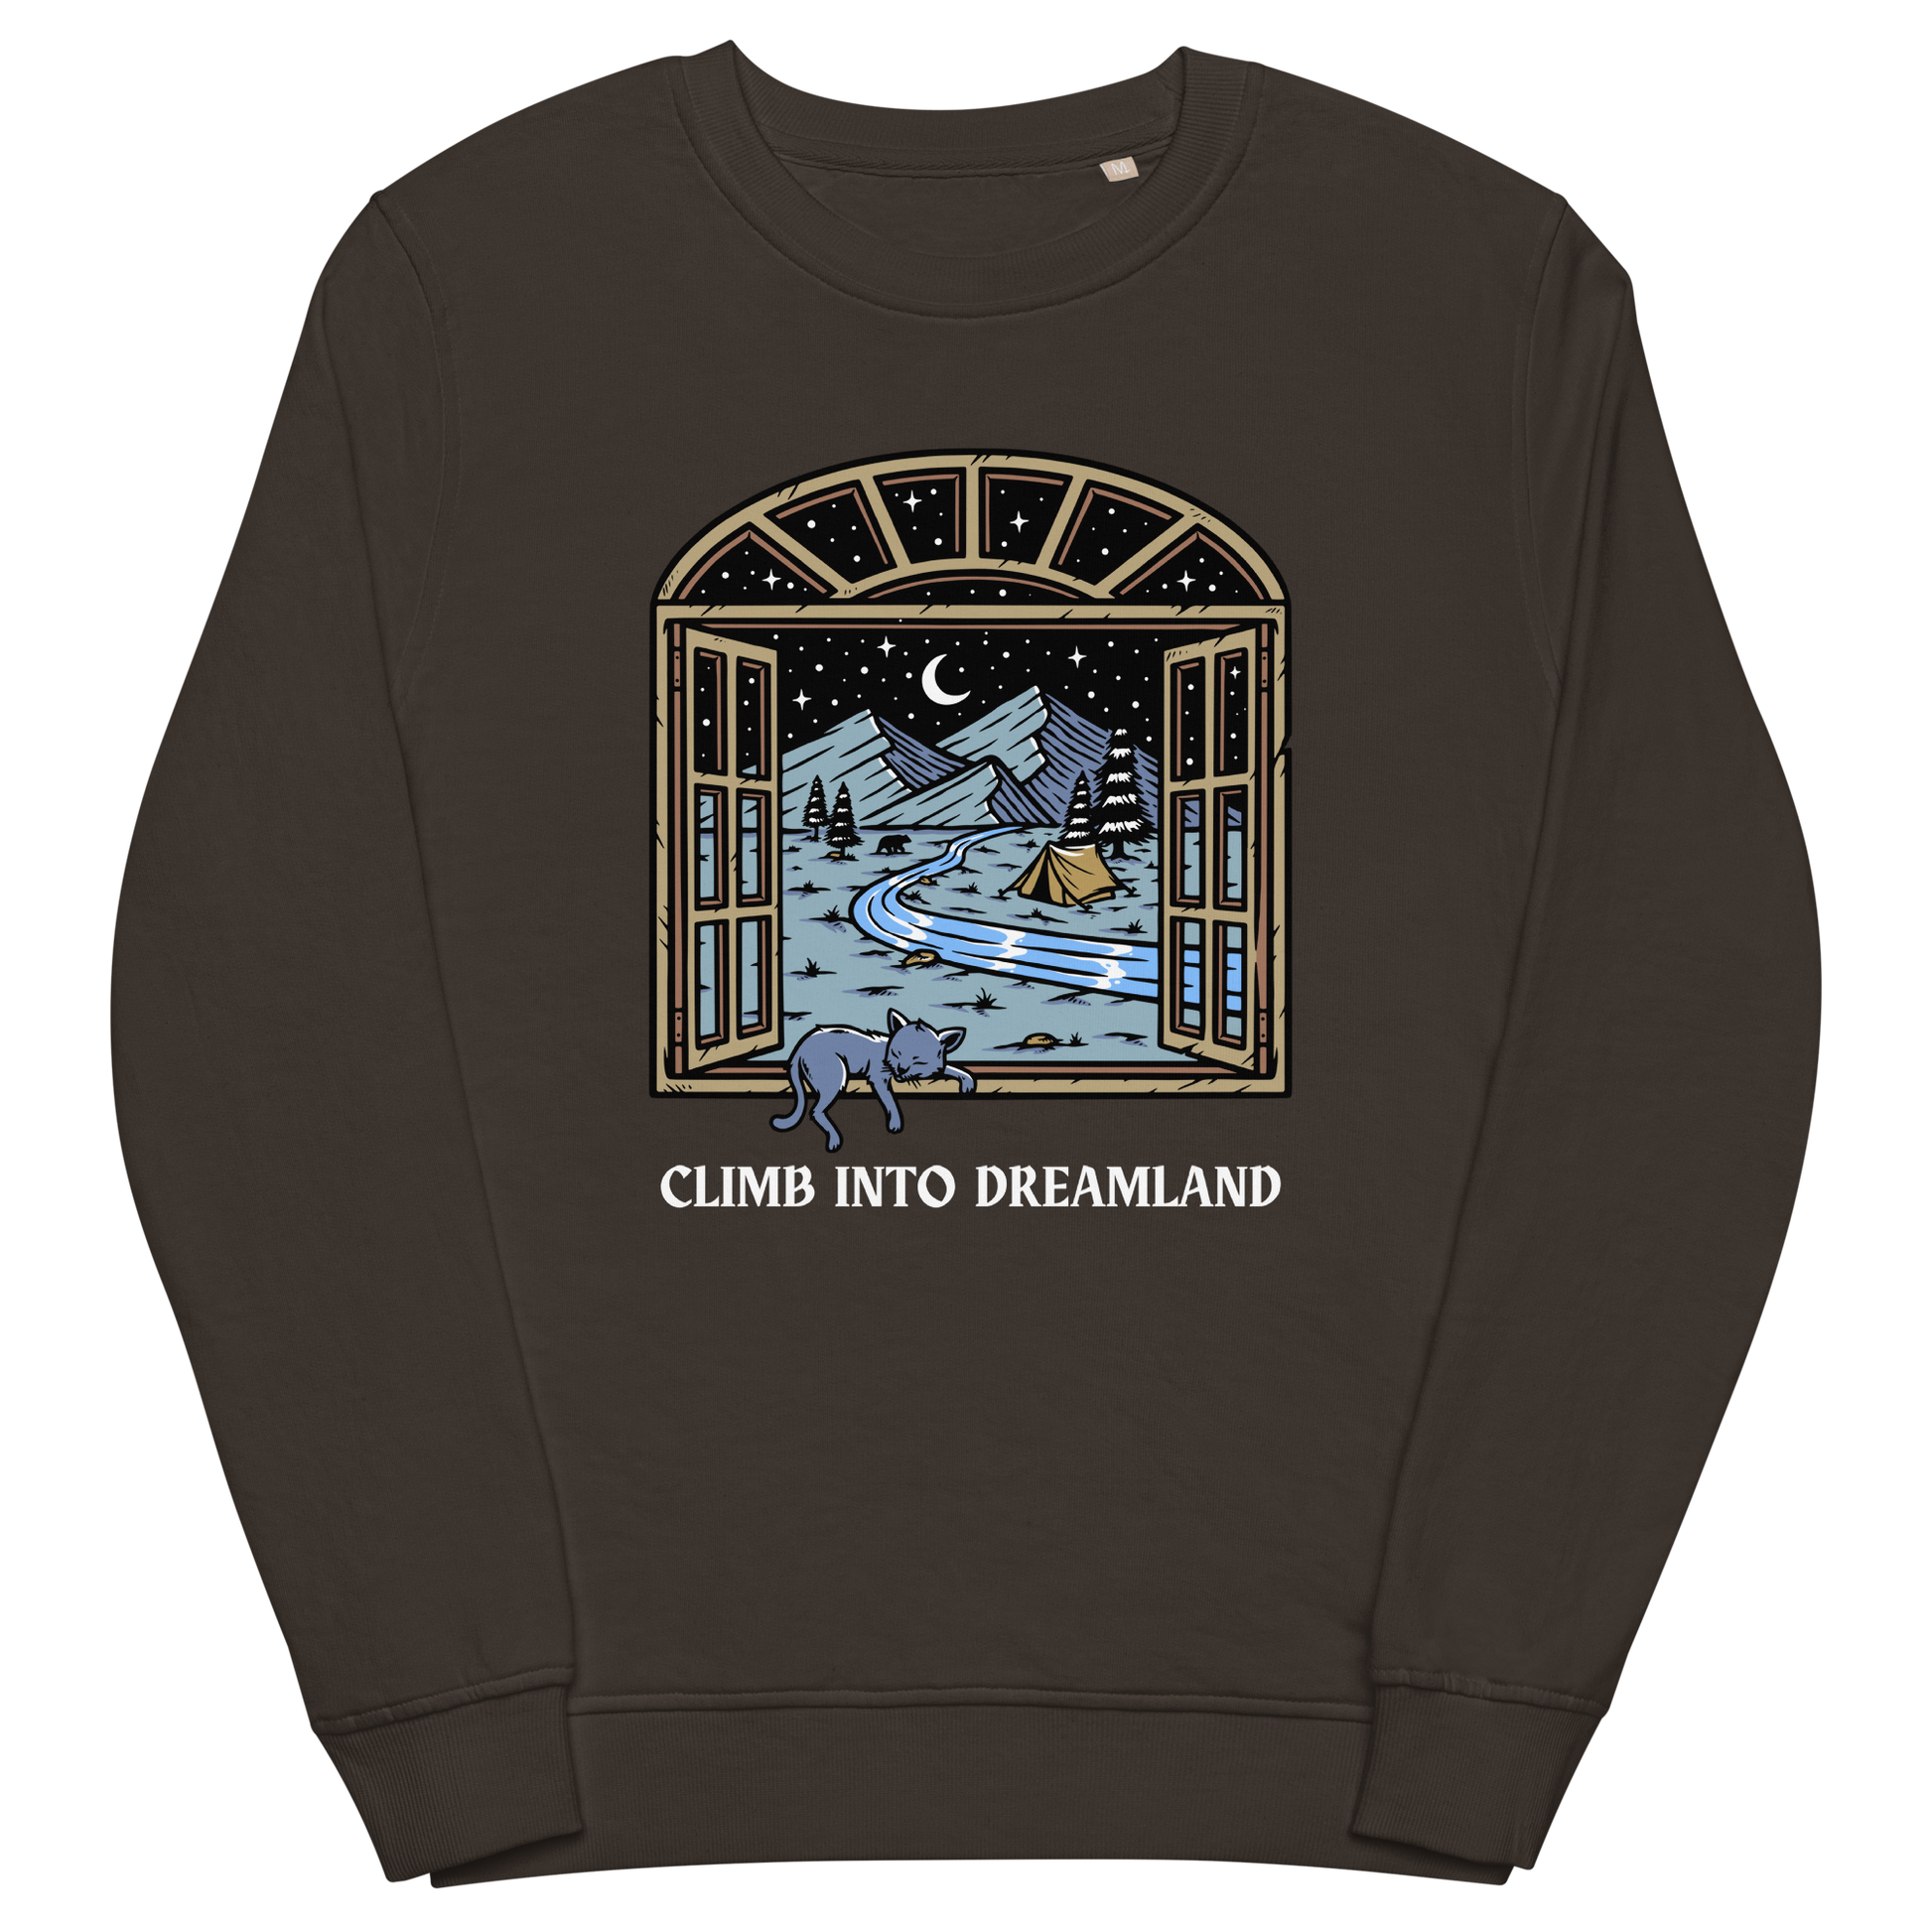 Deep Charcoal Grey Organic Cotton Climb Into Dreamland Sweatshirt featuring a mesmerizing mountain view graphic on the chest - Cool Graphic Nature Sweatshirts - Boozy Fox